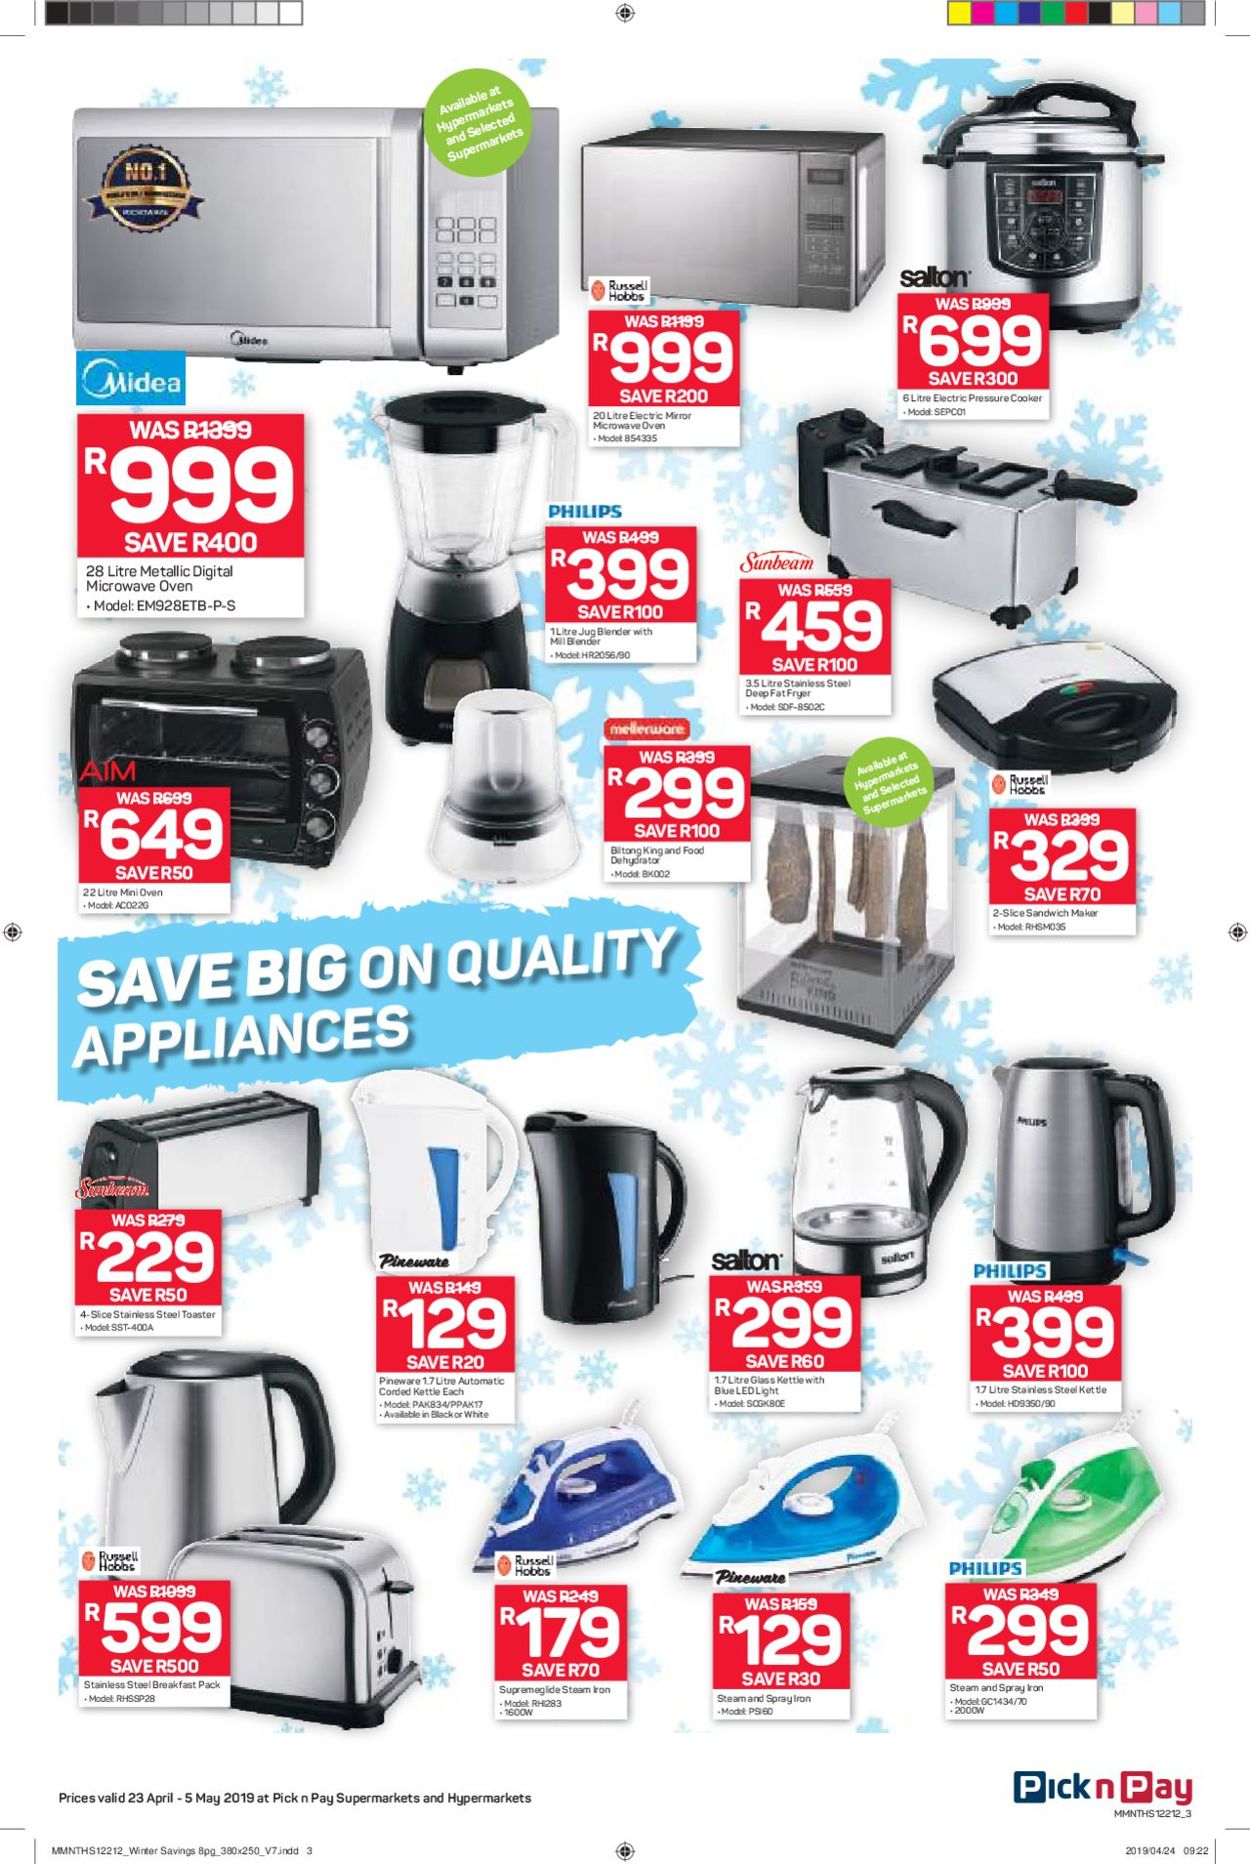 Pick n Pay Catalogue - 2019/04/22-2019/05/05 (Page 3)